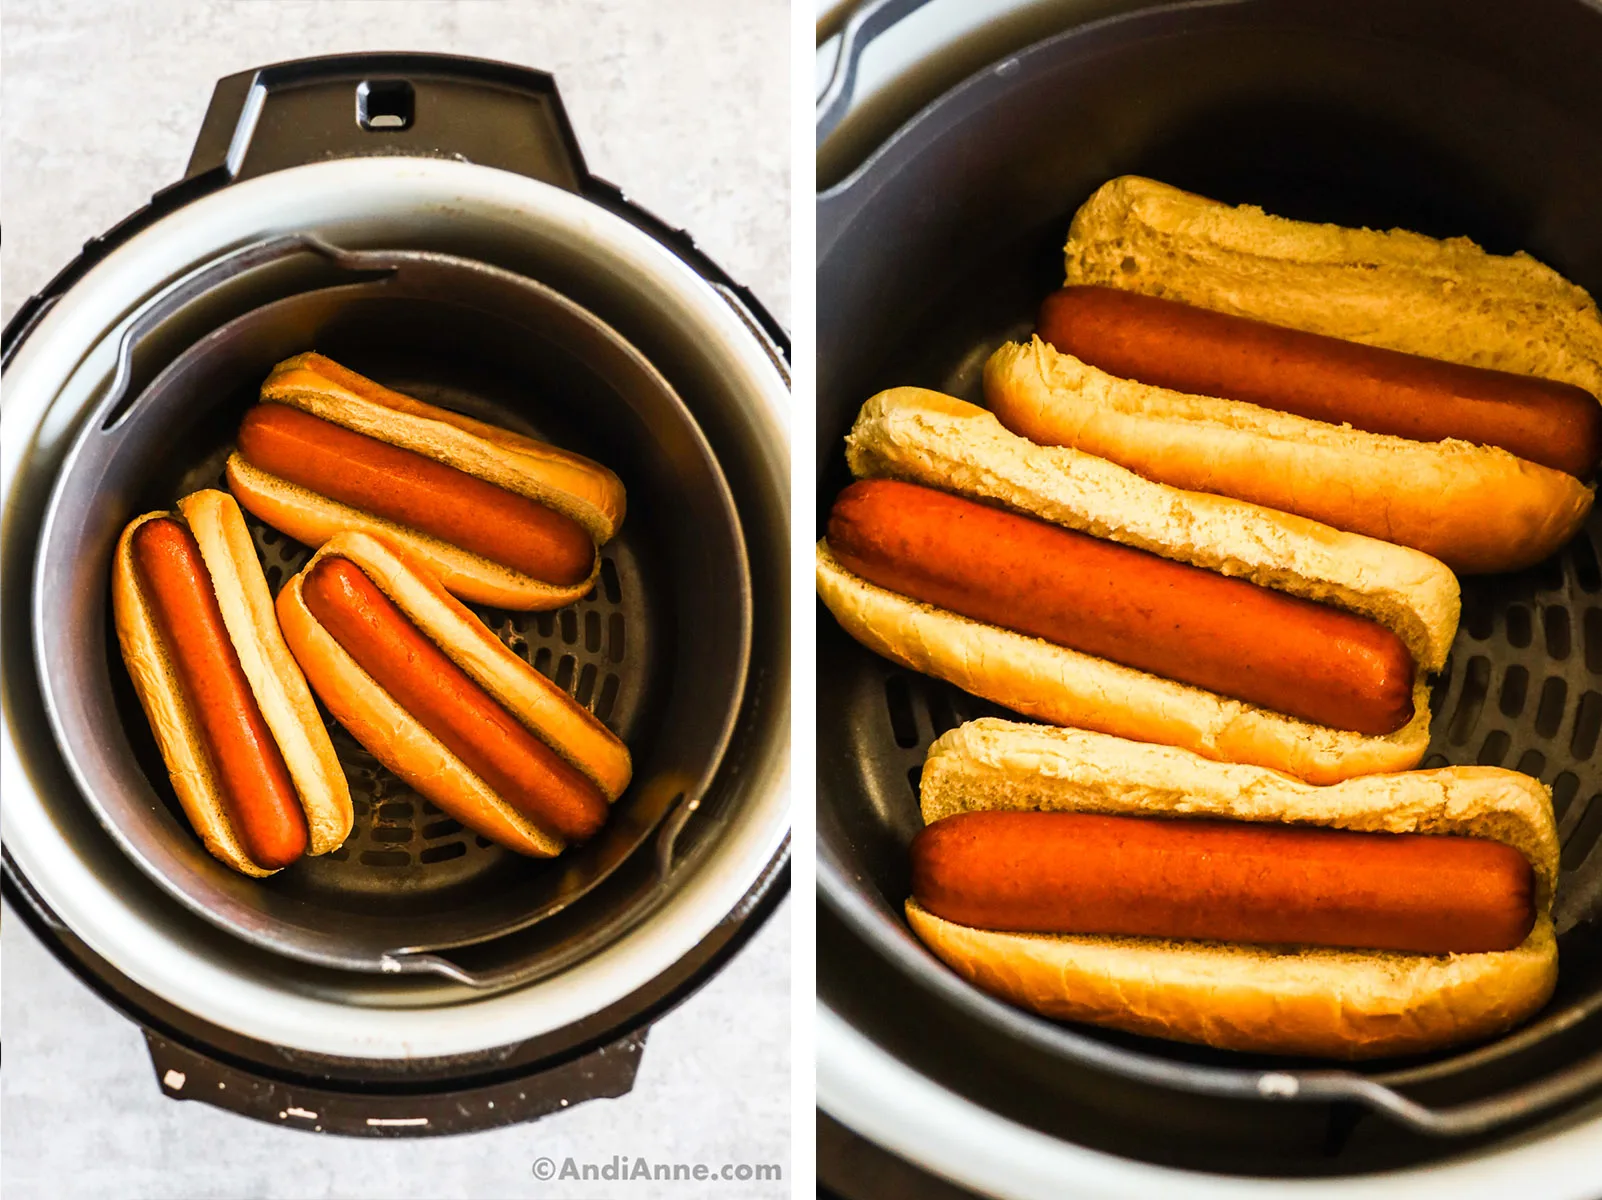 Looking into an air fryer with hot dogs and buns.